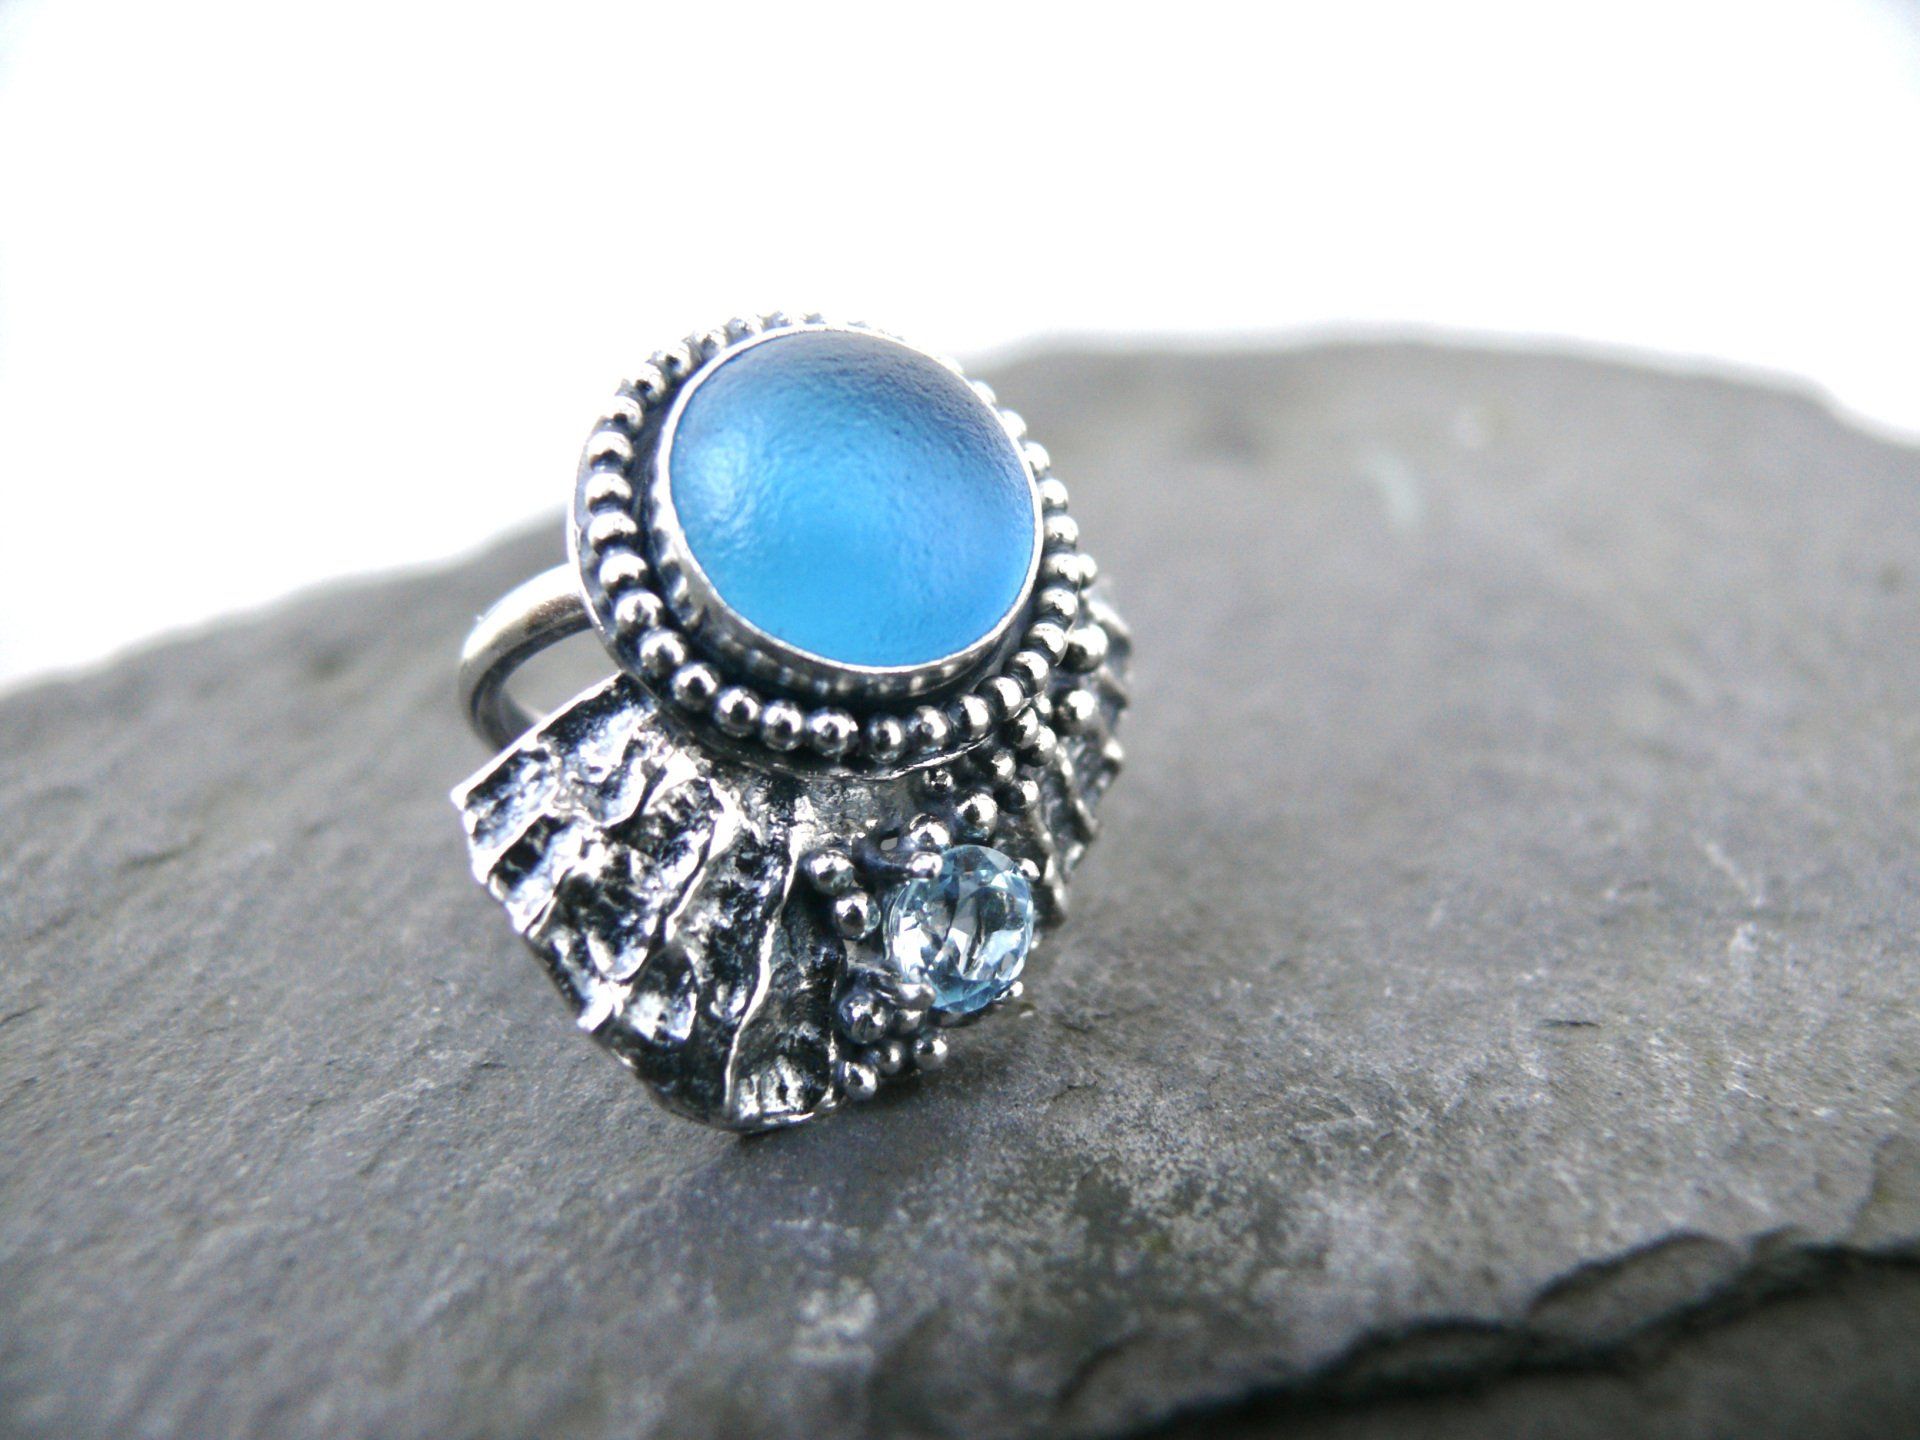 scottish sea glass ring made in scotland. Blue sea glass with shell design